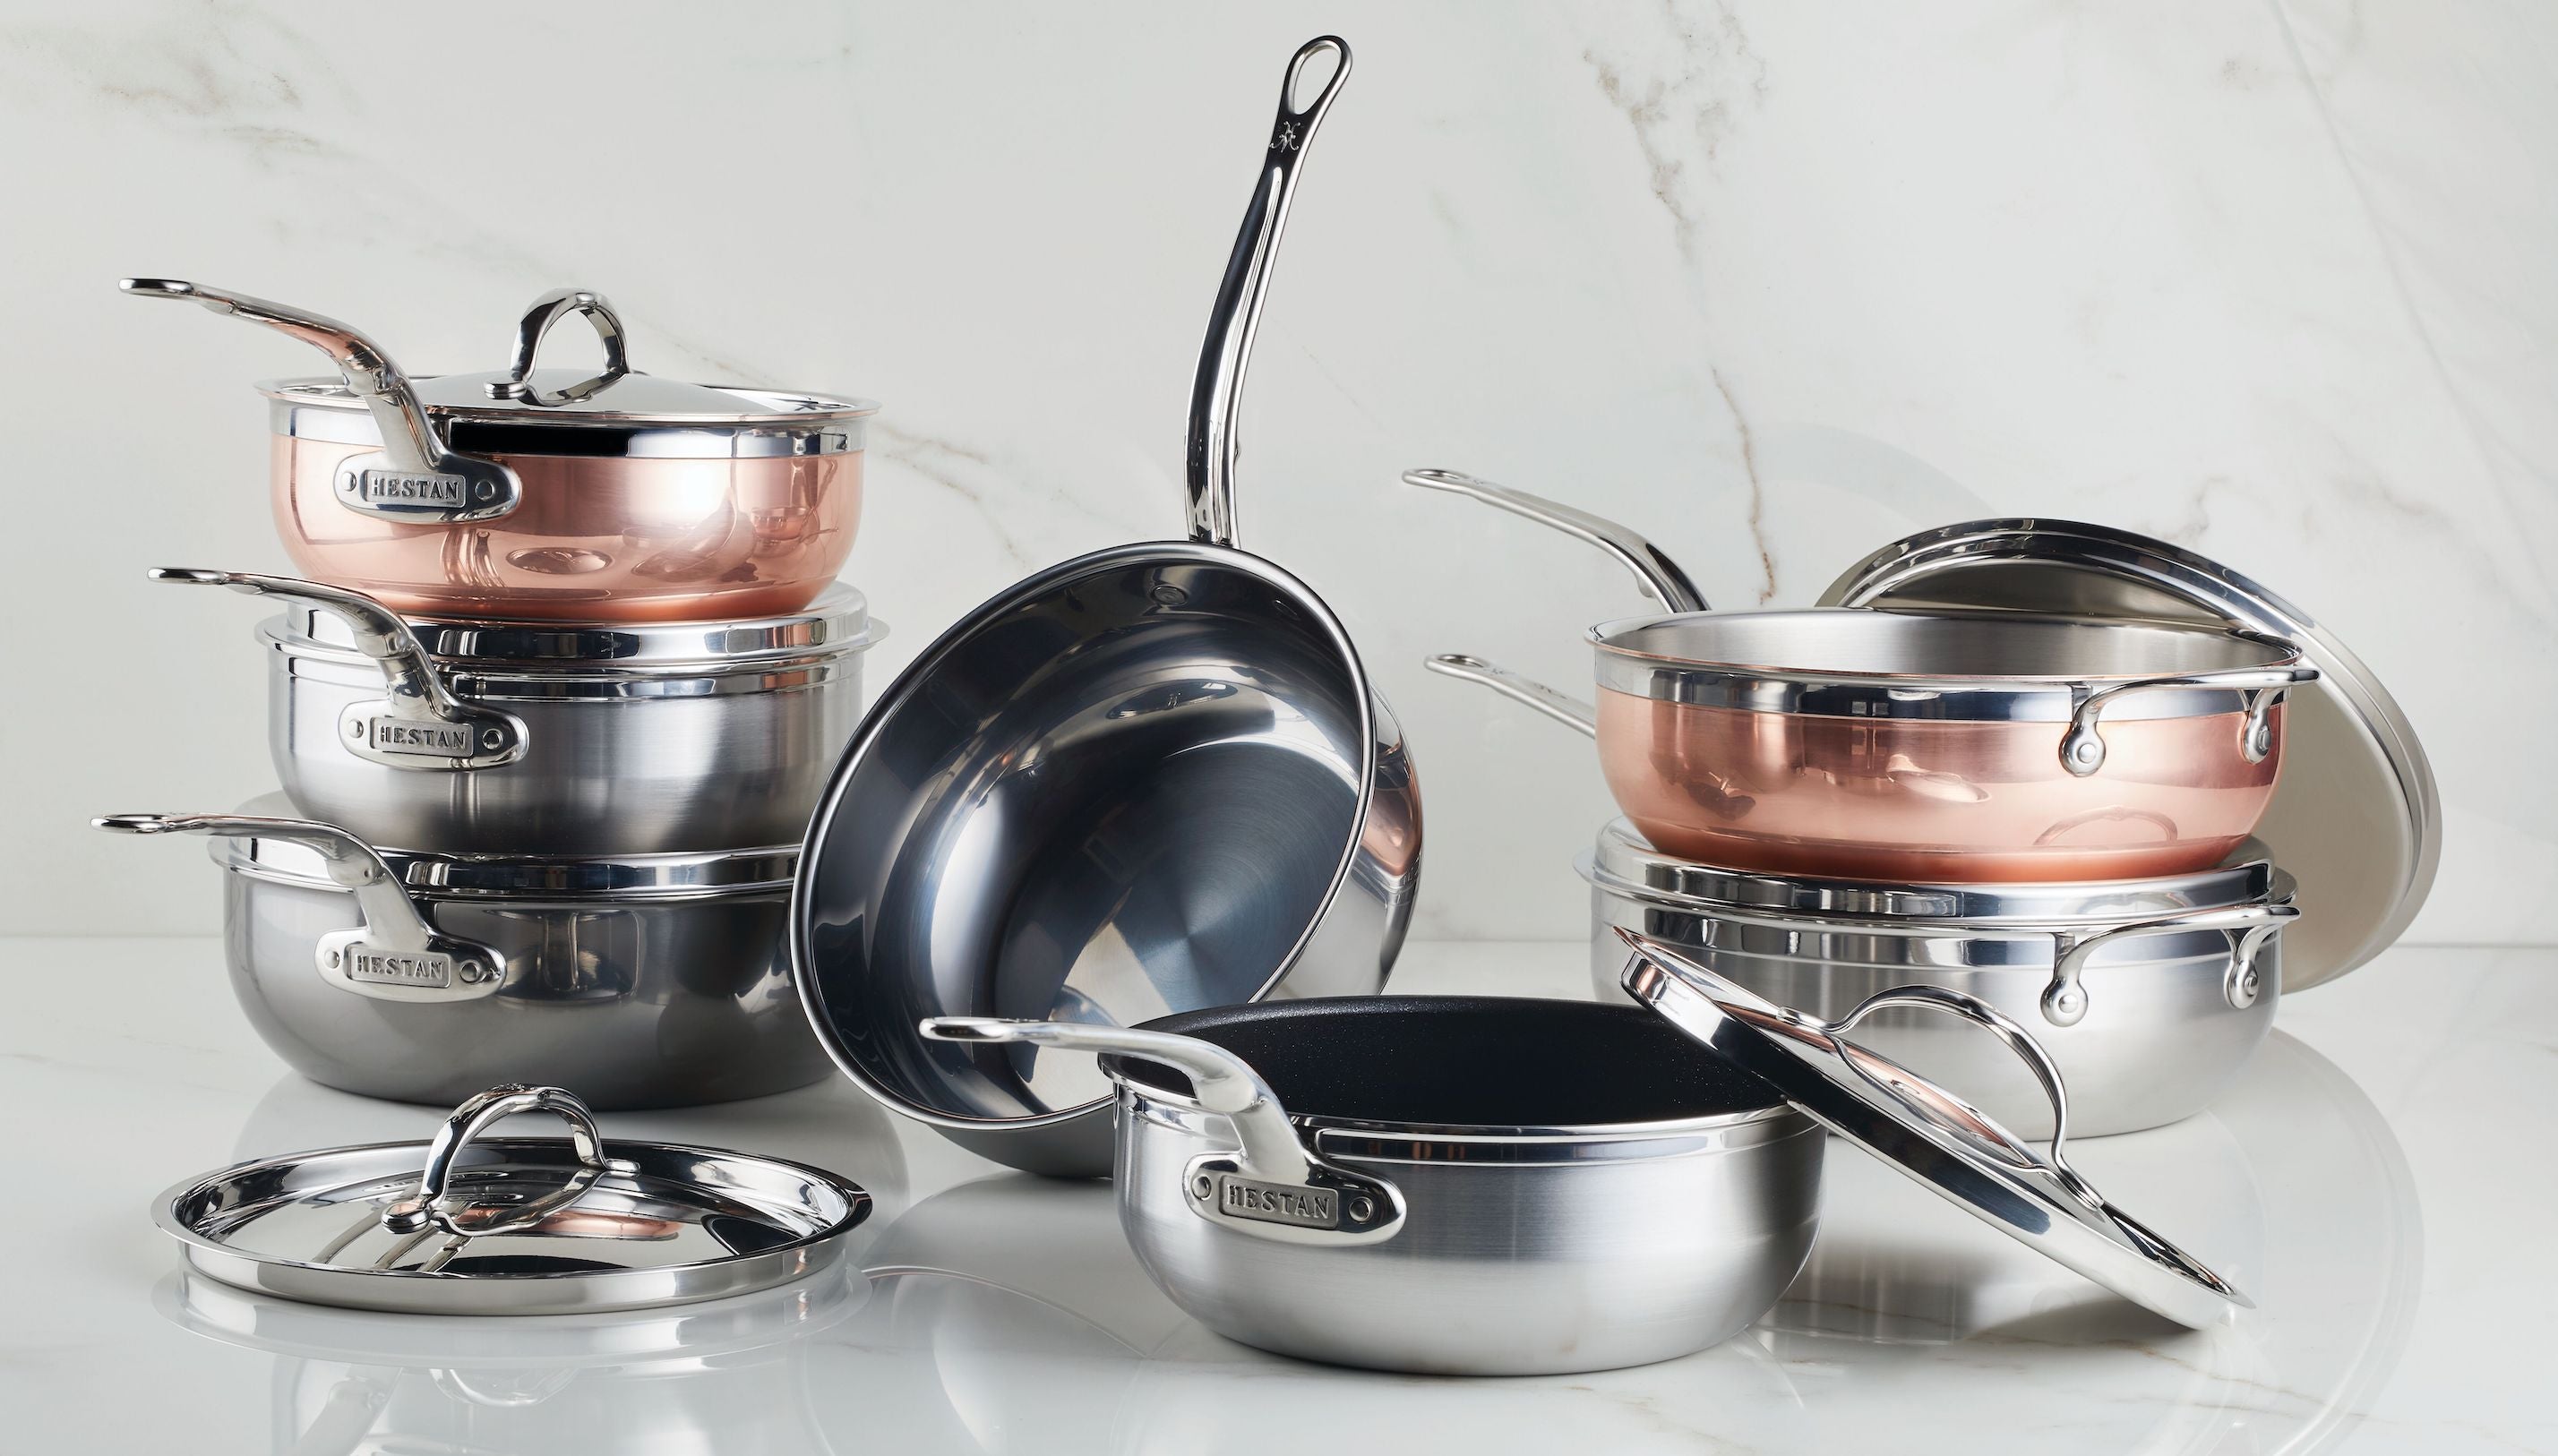 http://hestanculinary.com/cdn/shop/collections/015811-004-Hestan-Culinary-April-Promo-_-Homepage-Slidding-Banner-edited_8f9e1f6a-e7f8-481f-a12e-efe704d394e2.jpg?v=1682533972